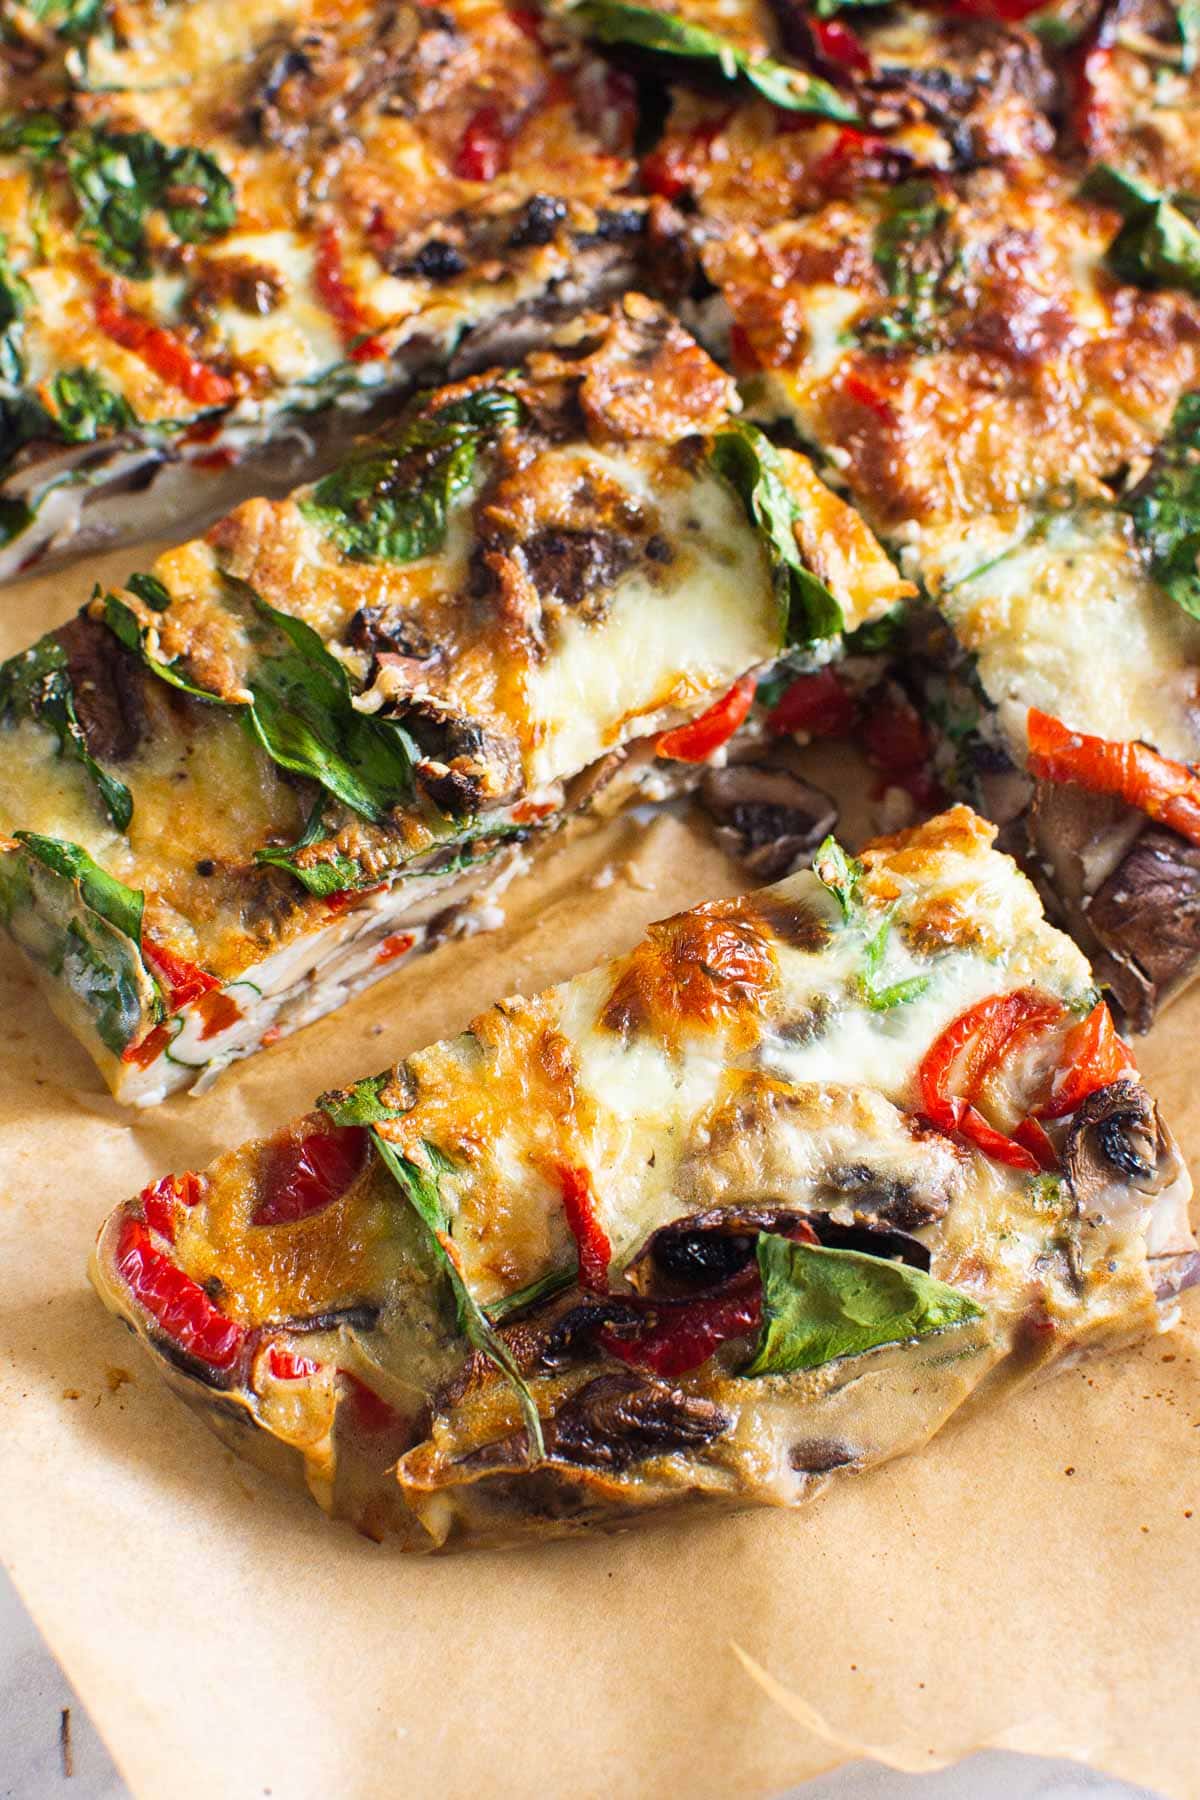 Air fryer breakfast casserole with mushrooms, spinach and peppers sliced on parchment paper.